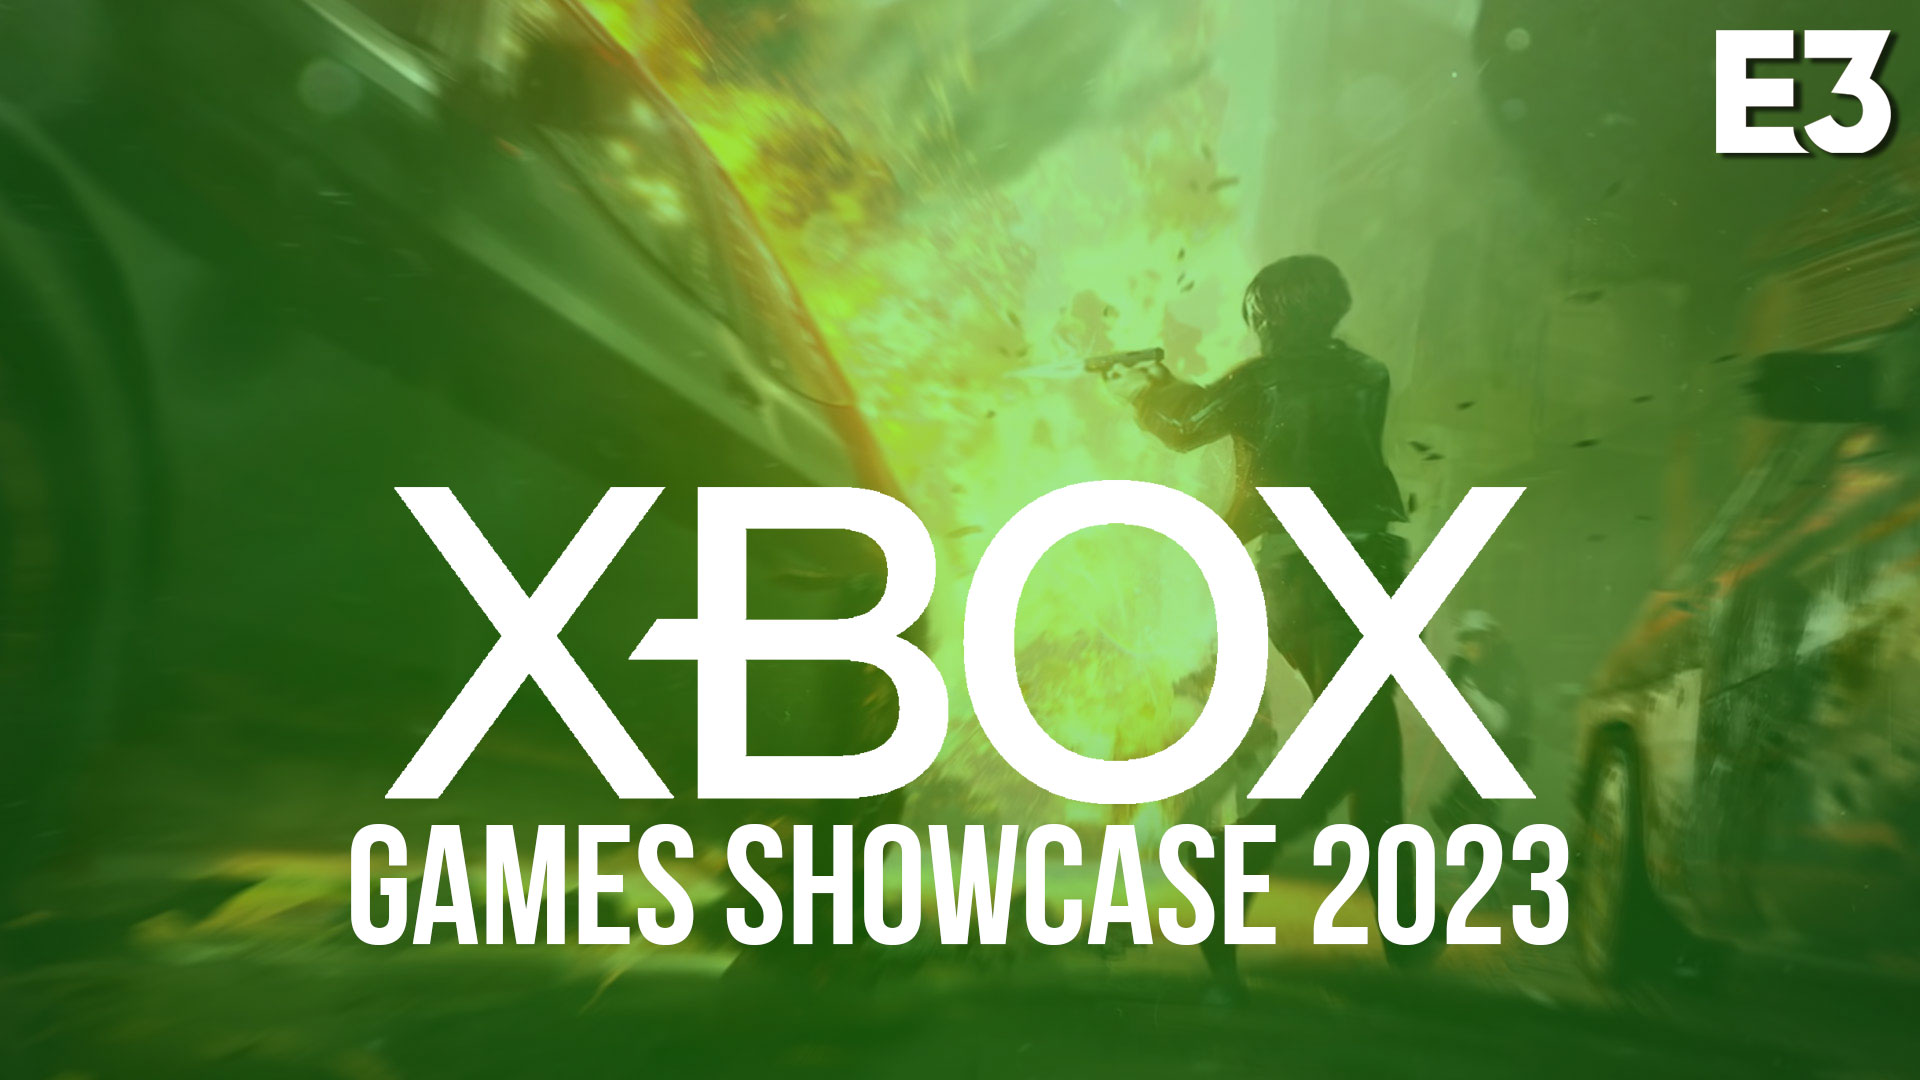 How many Xbox 2022 Showcase games actually launched on time